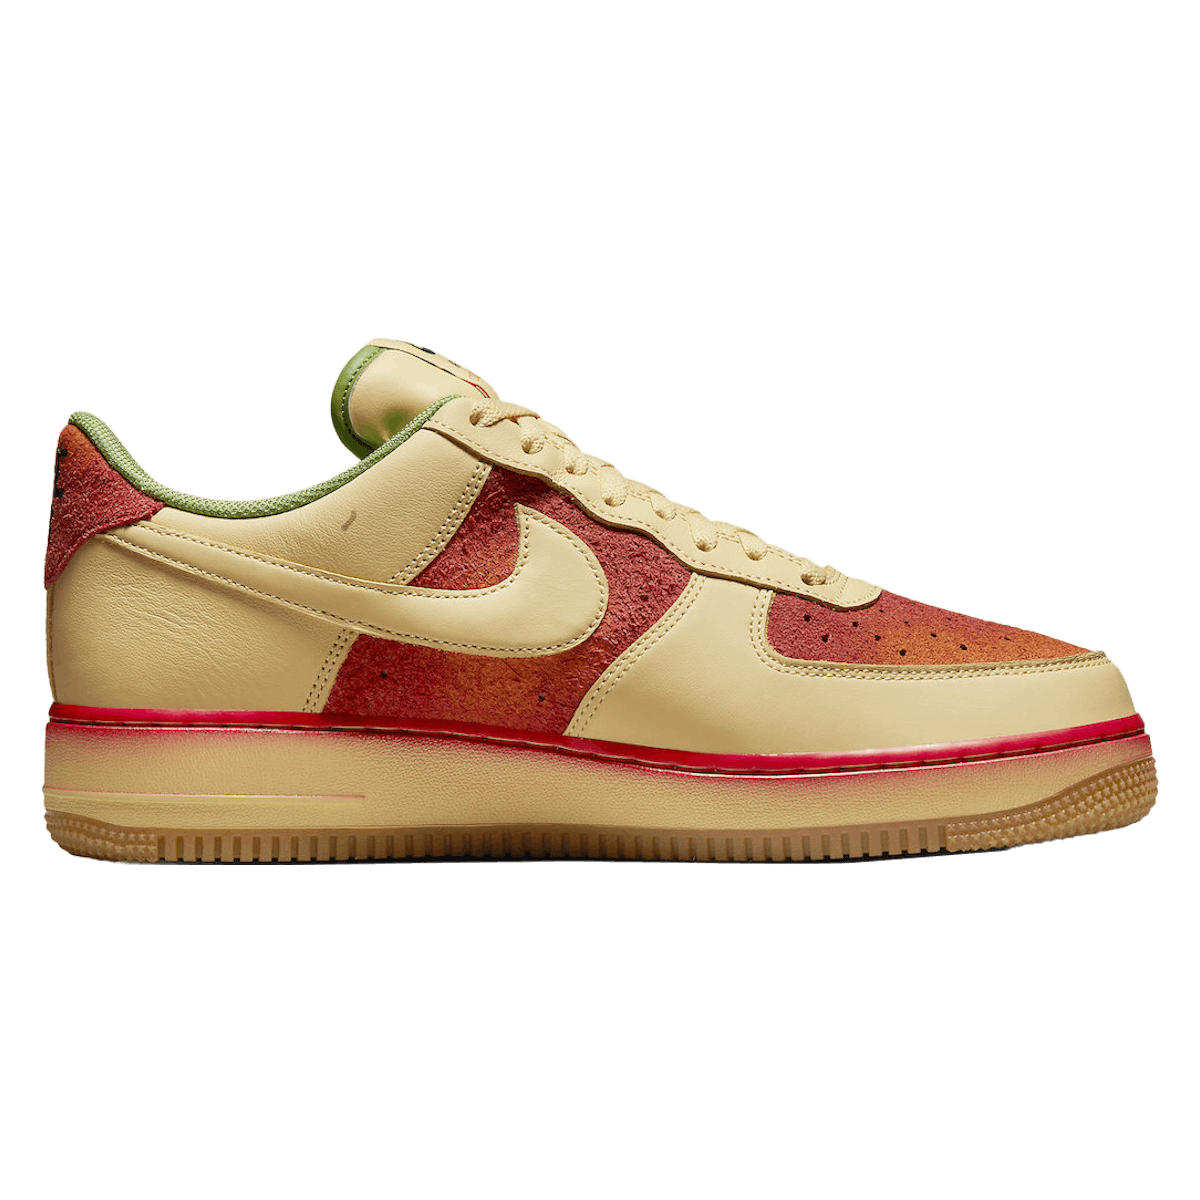 Nike Air Force 1 '07 Low "Chili"